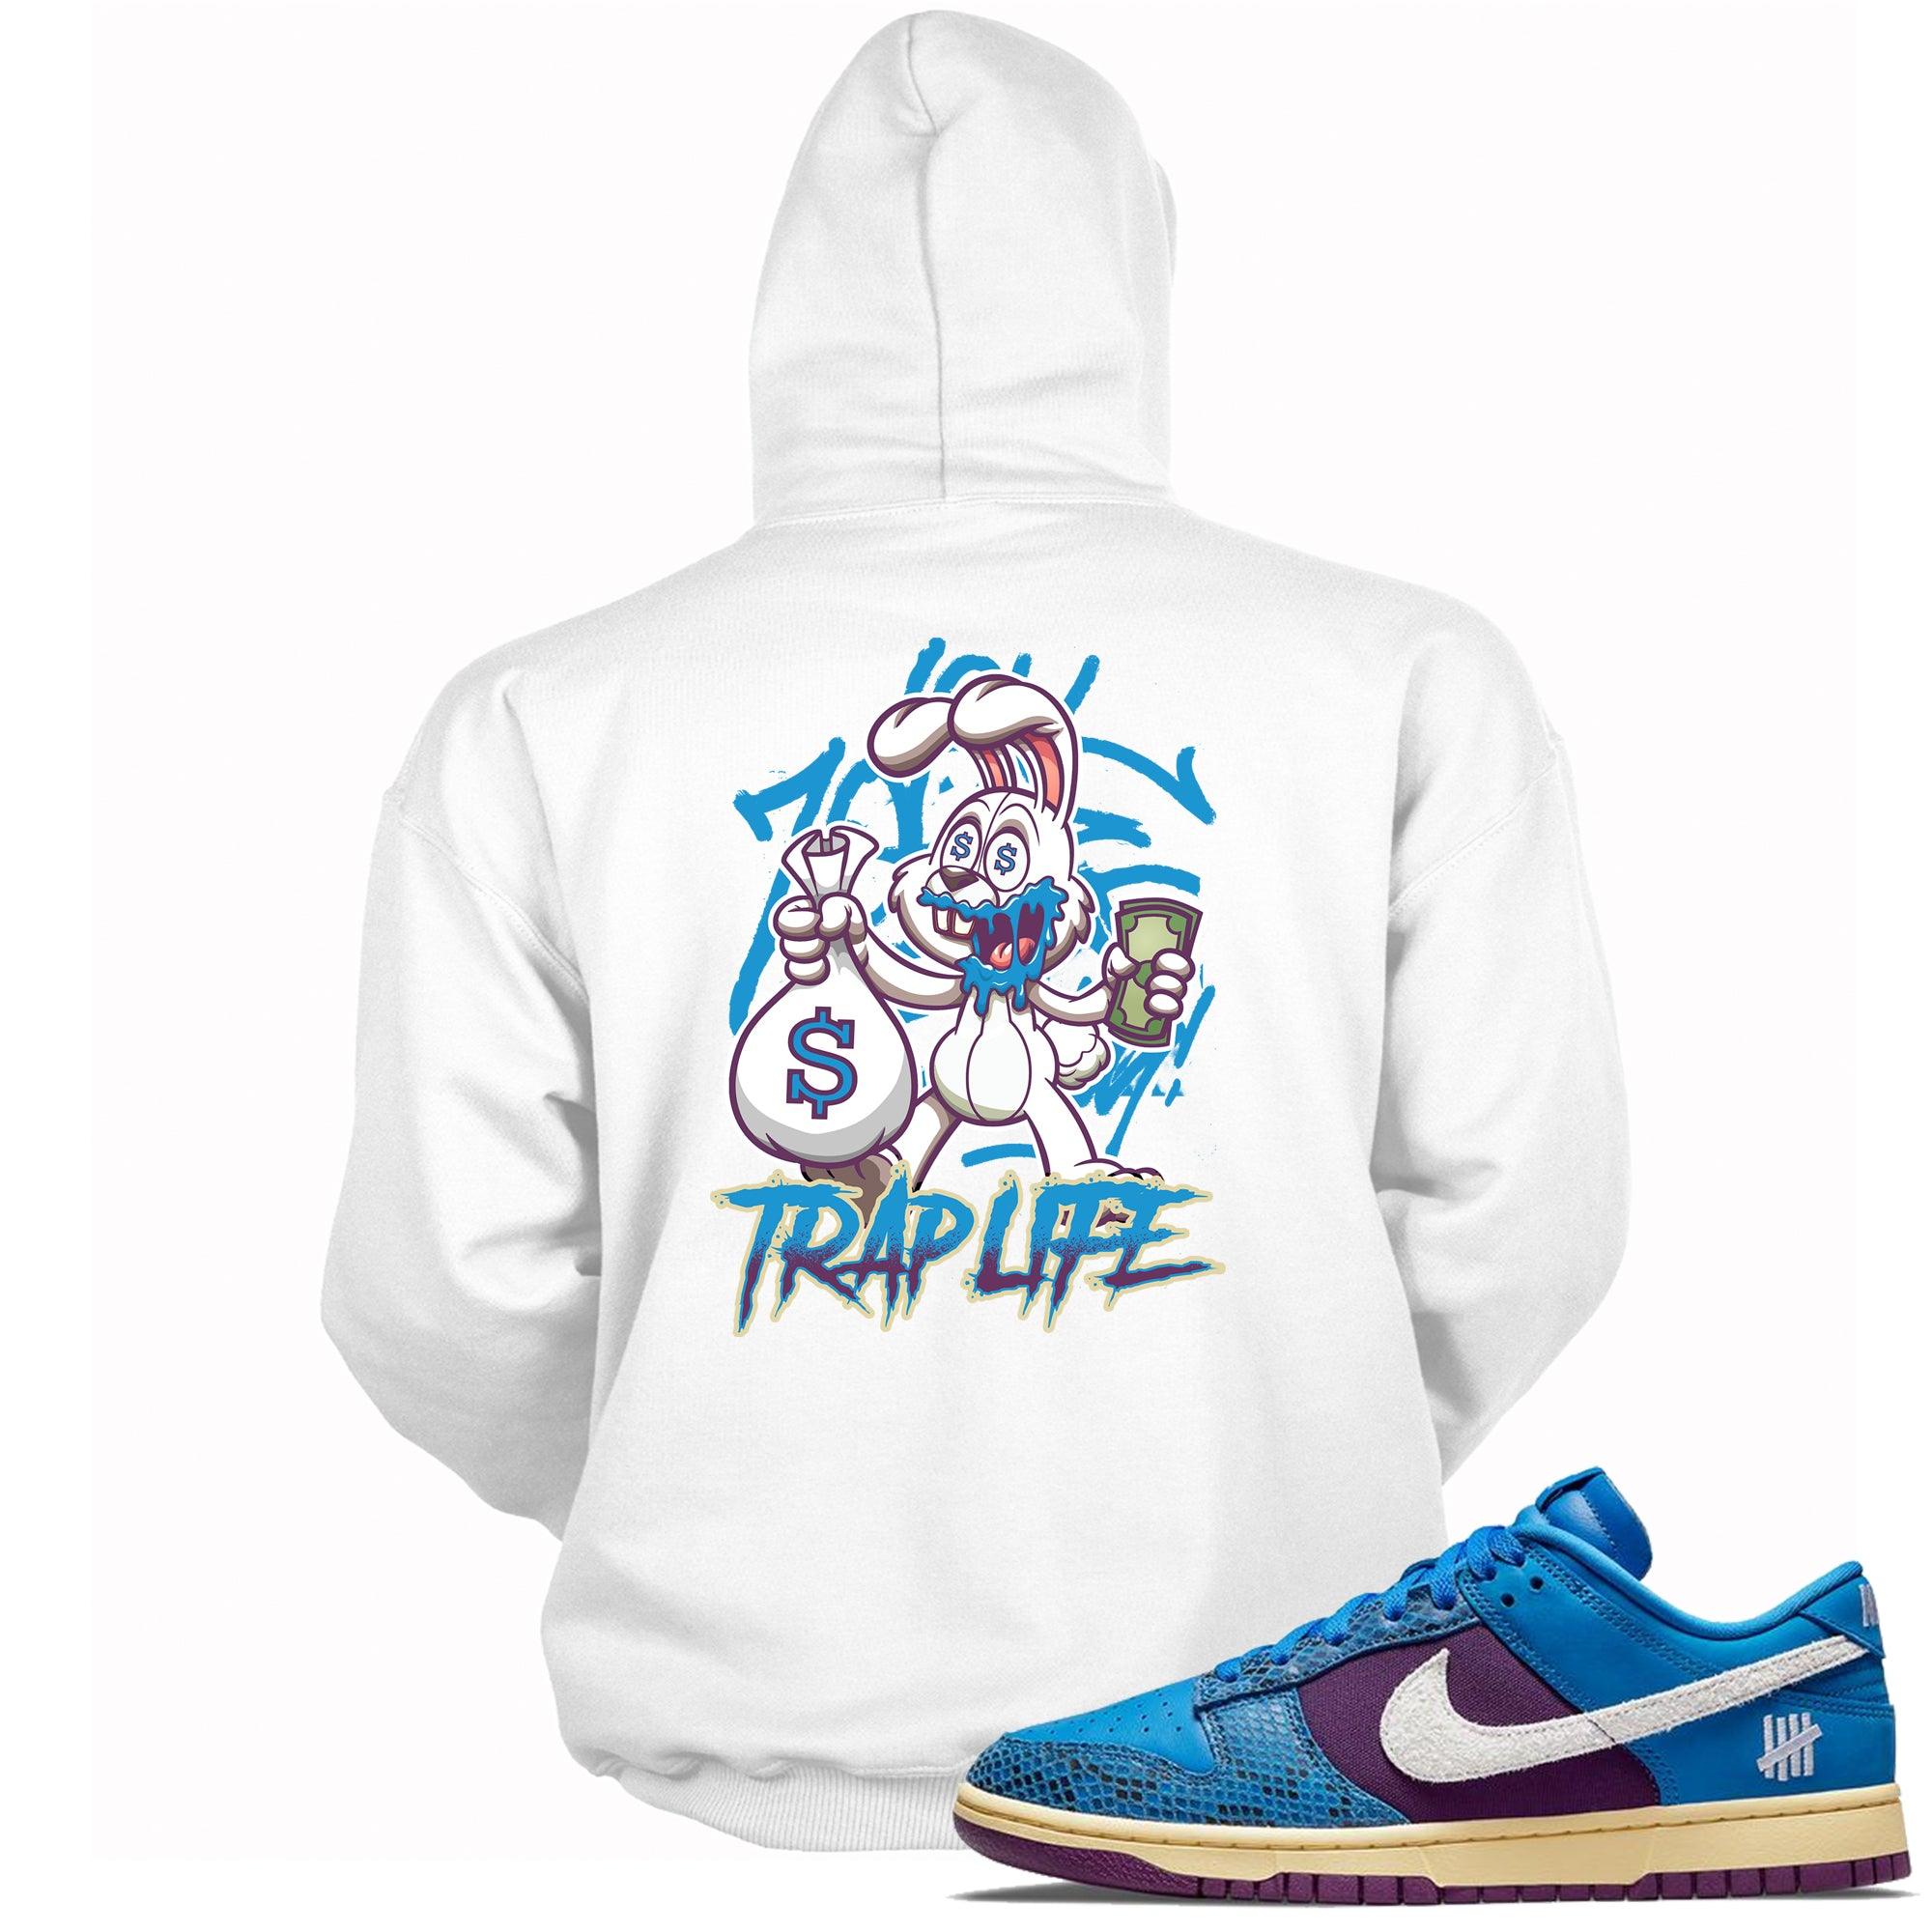 Trap Life Hoodie Nike Dunk Low Undefeated 5 On It Dunk vs AF1 photo